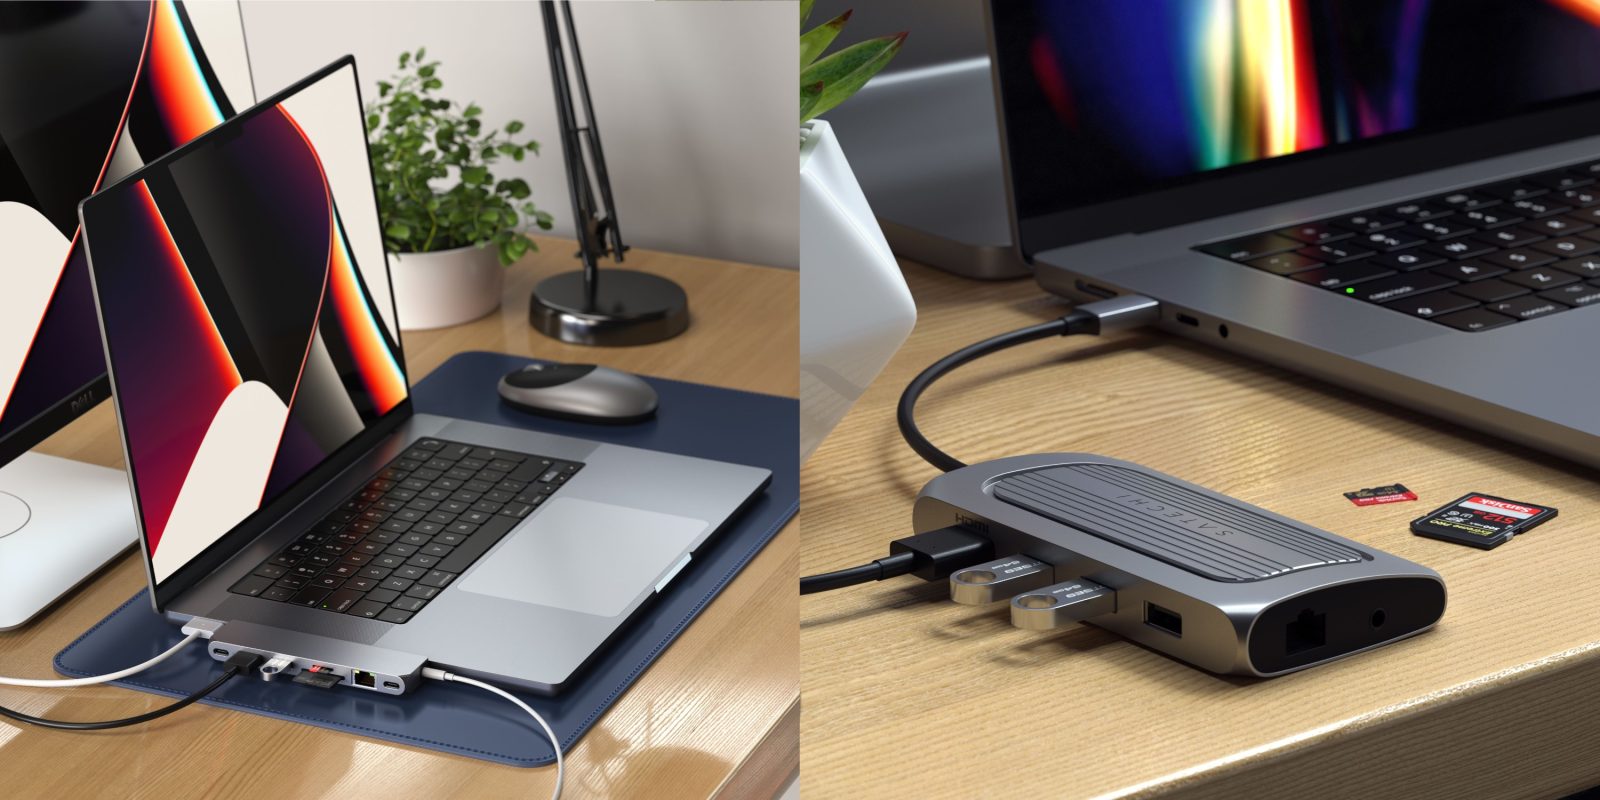 Satechi unveils USB-C Multiport Adapter with 8K support and Pro Hub Max for MacBook Pro -